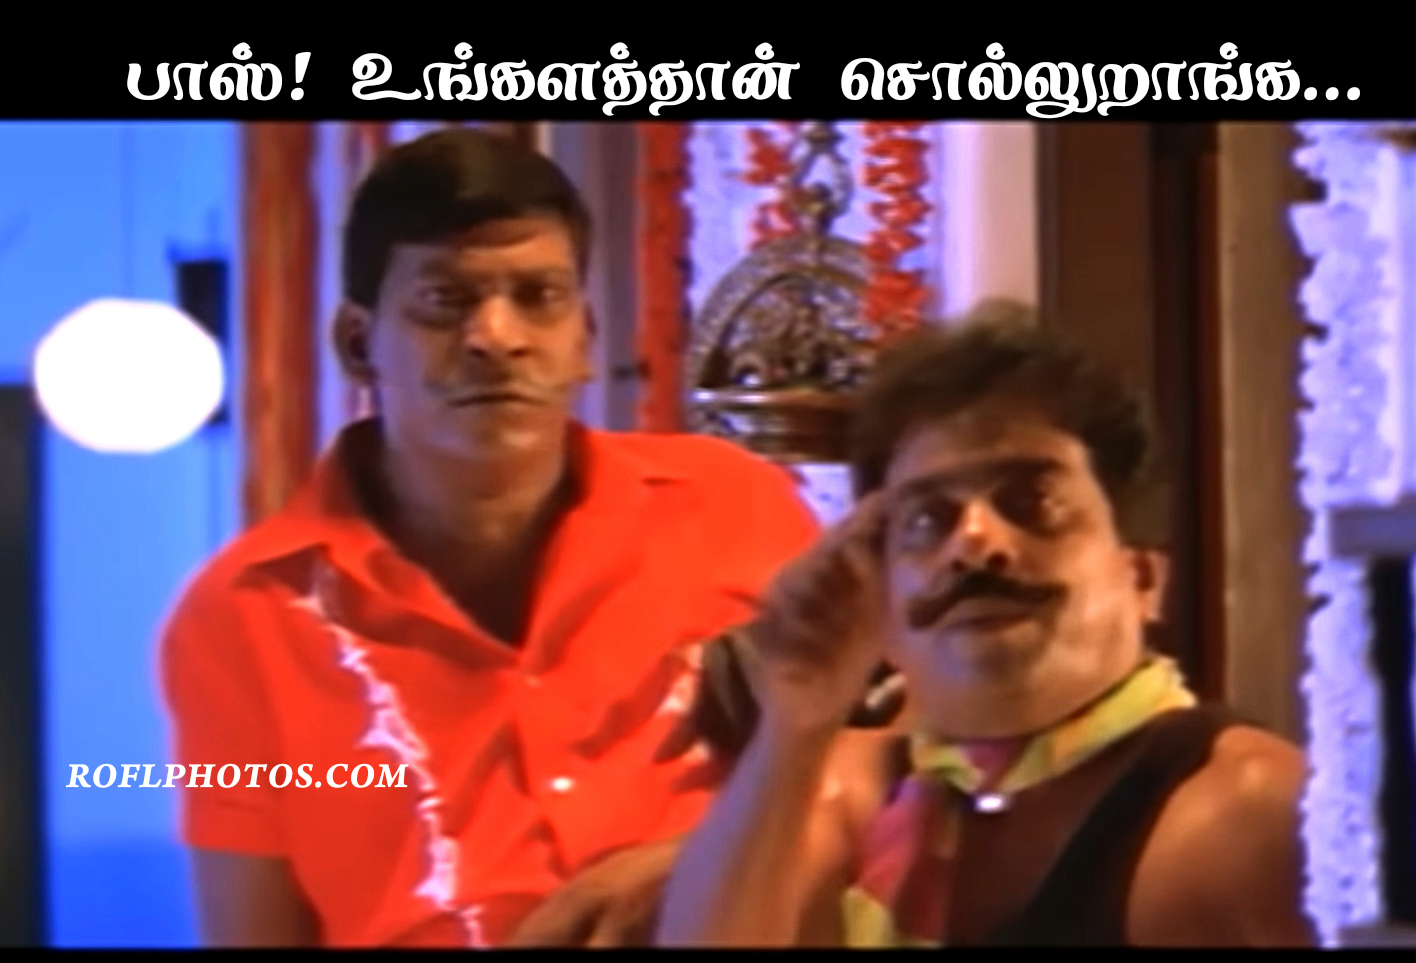 Tamil Funny Memes Videos Download 22 likes · 3 talking about this. tamil funny memes videos download